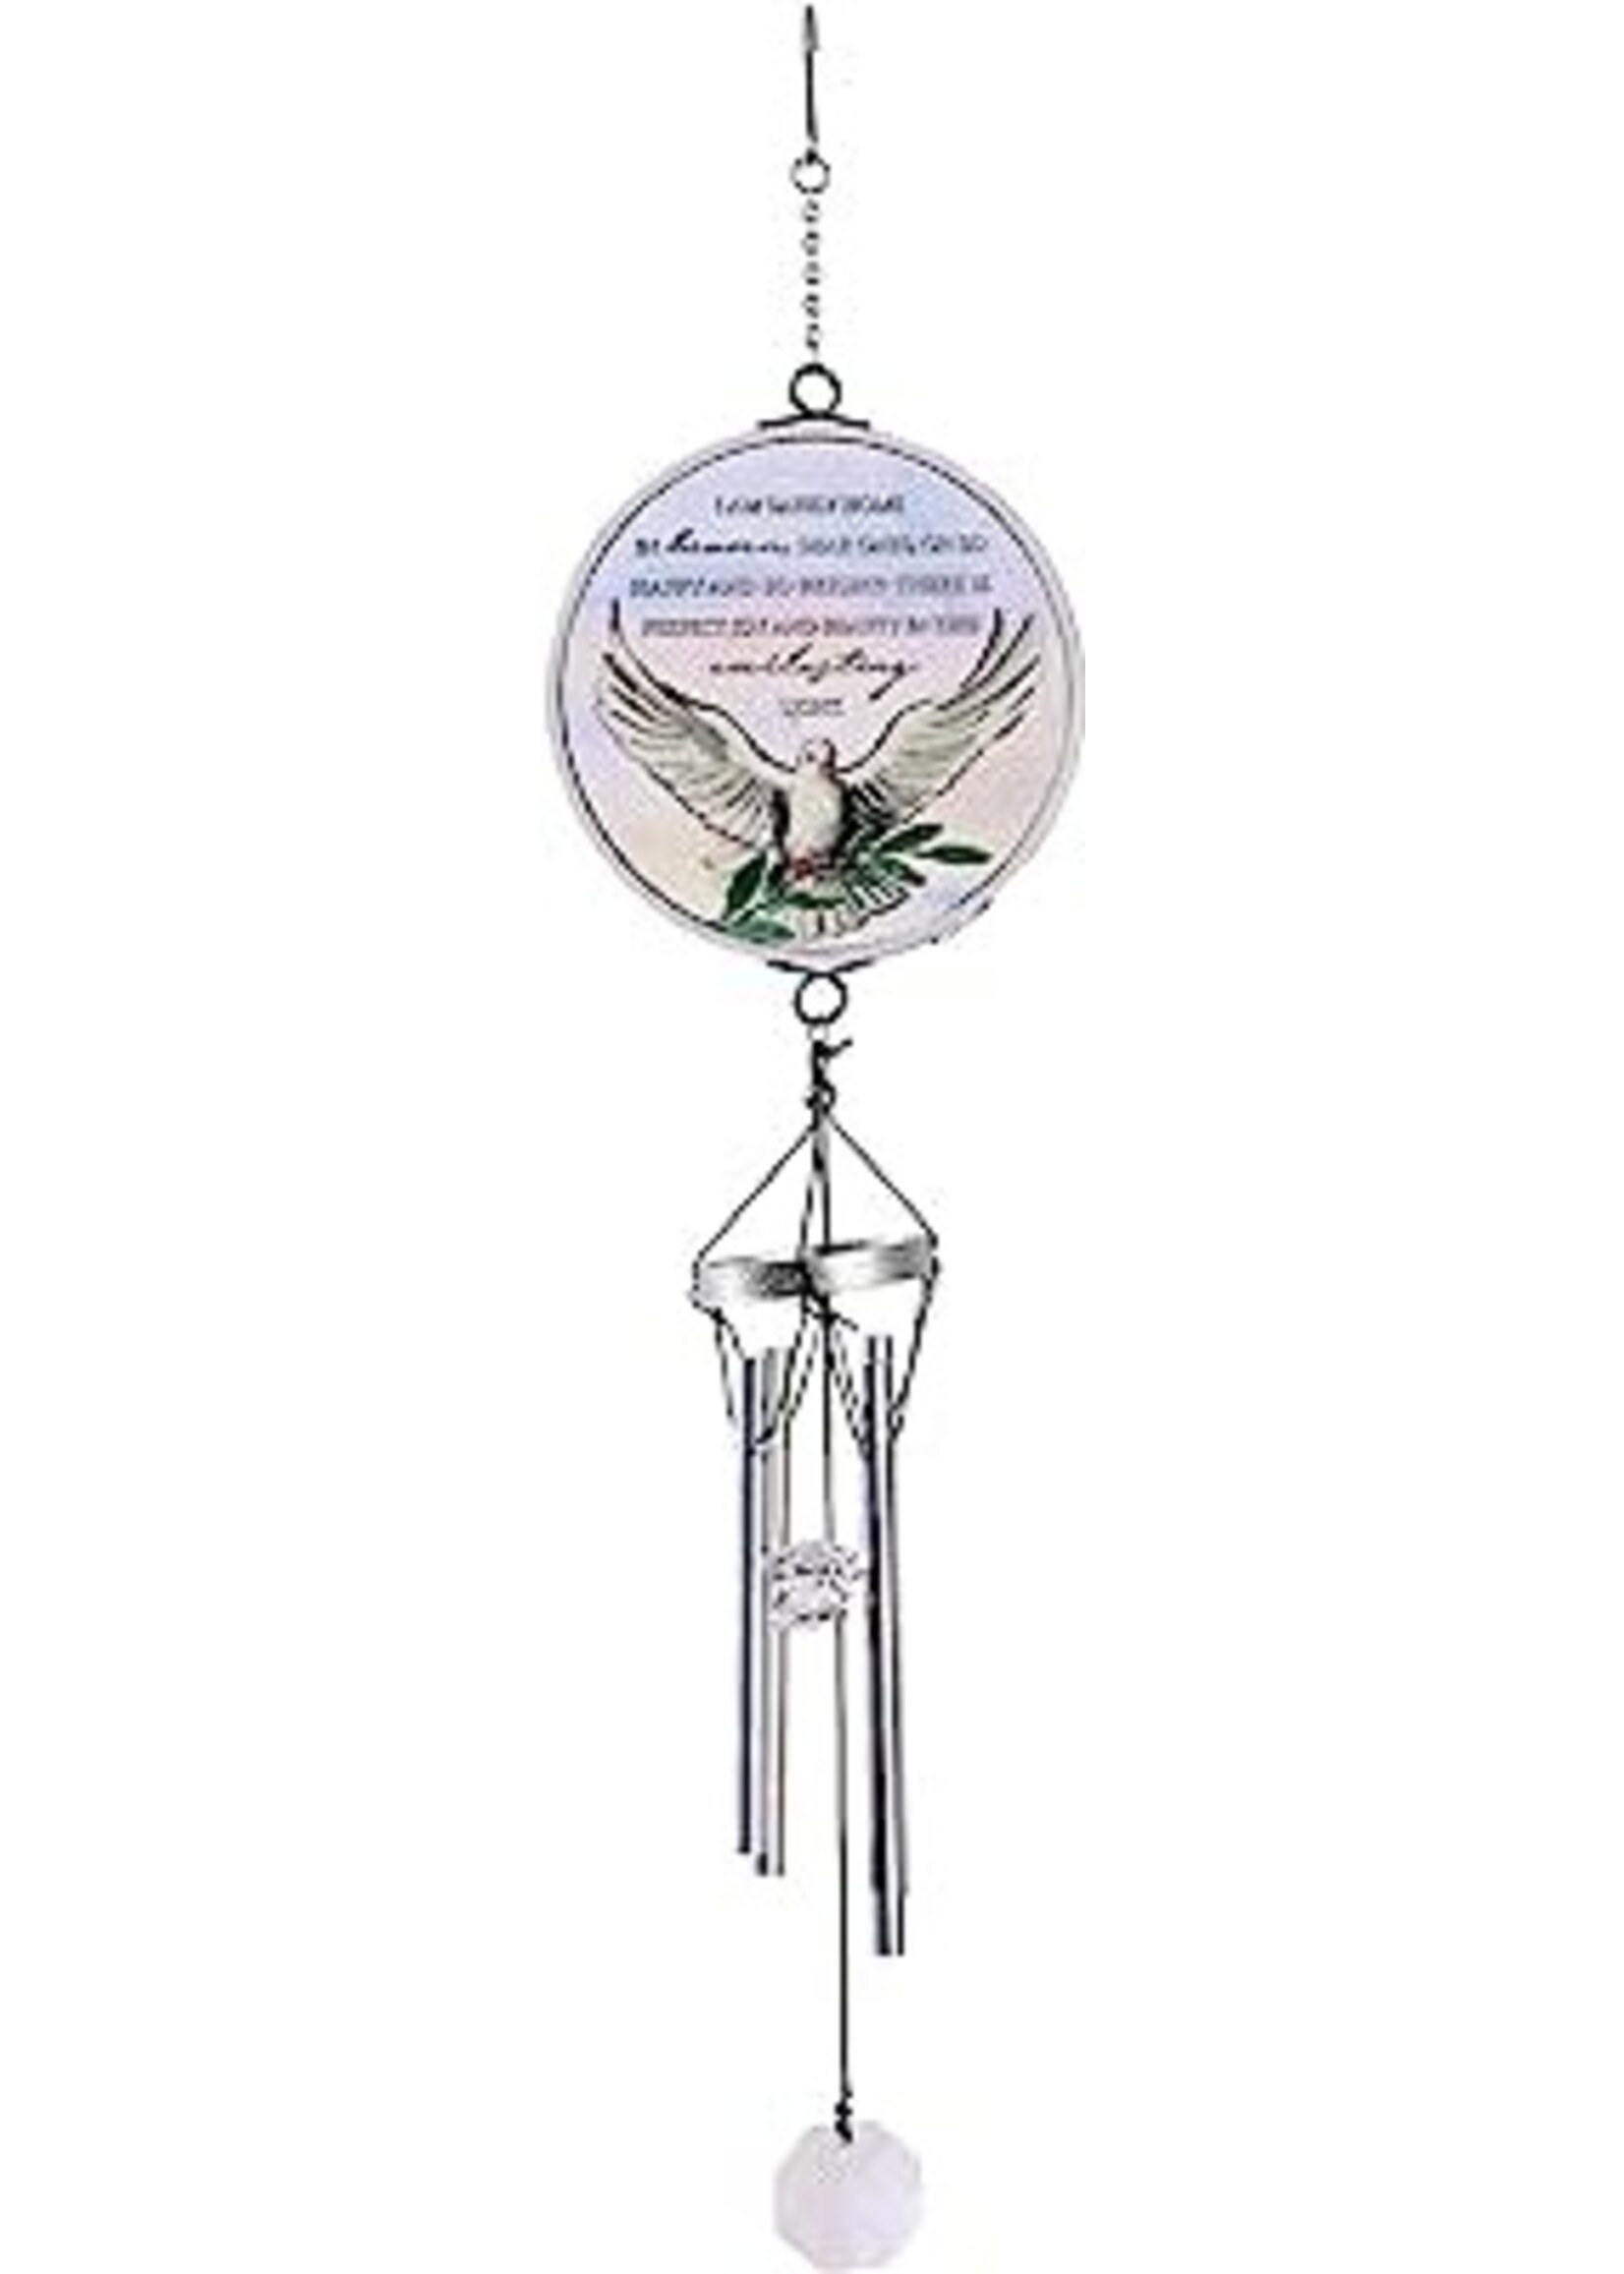 Windchime Safety Home in Heaven